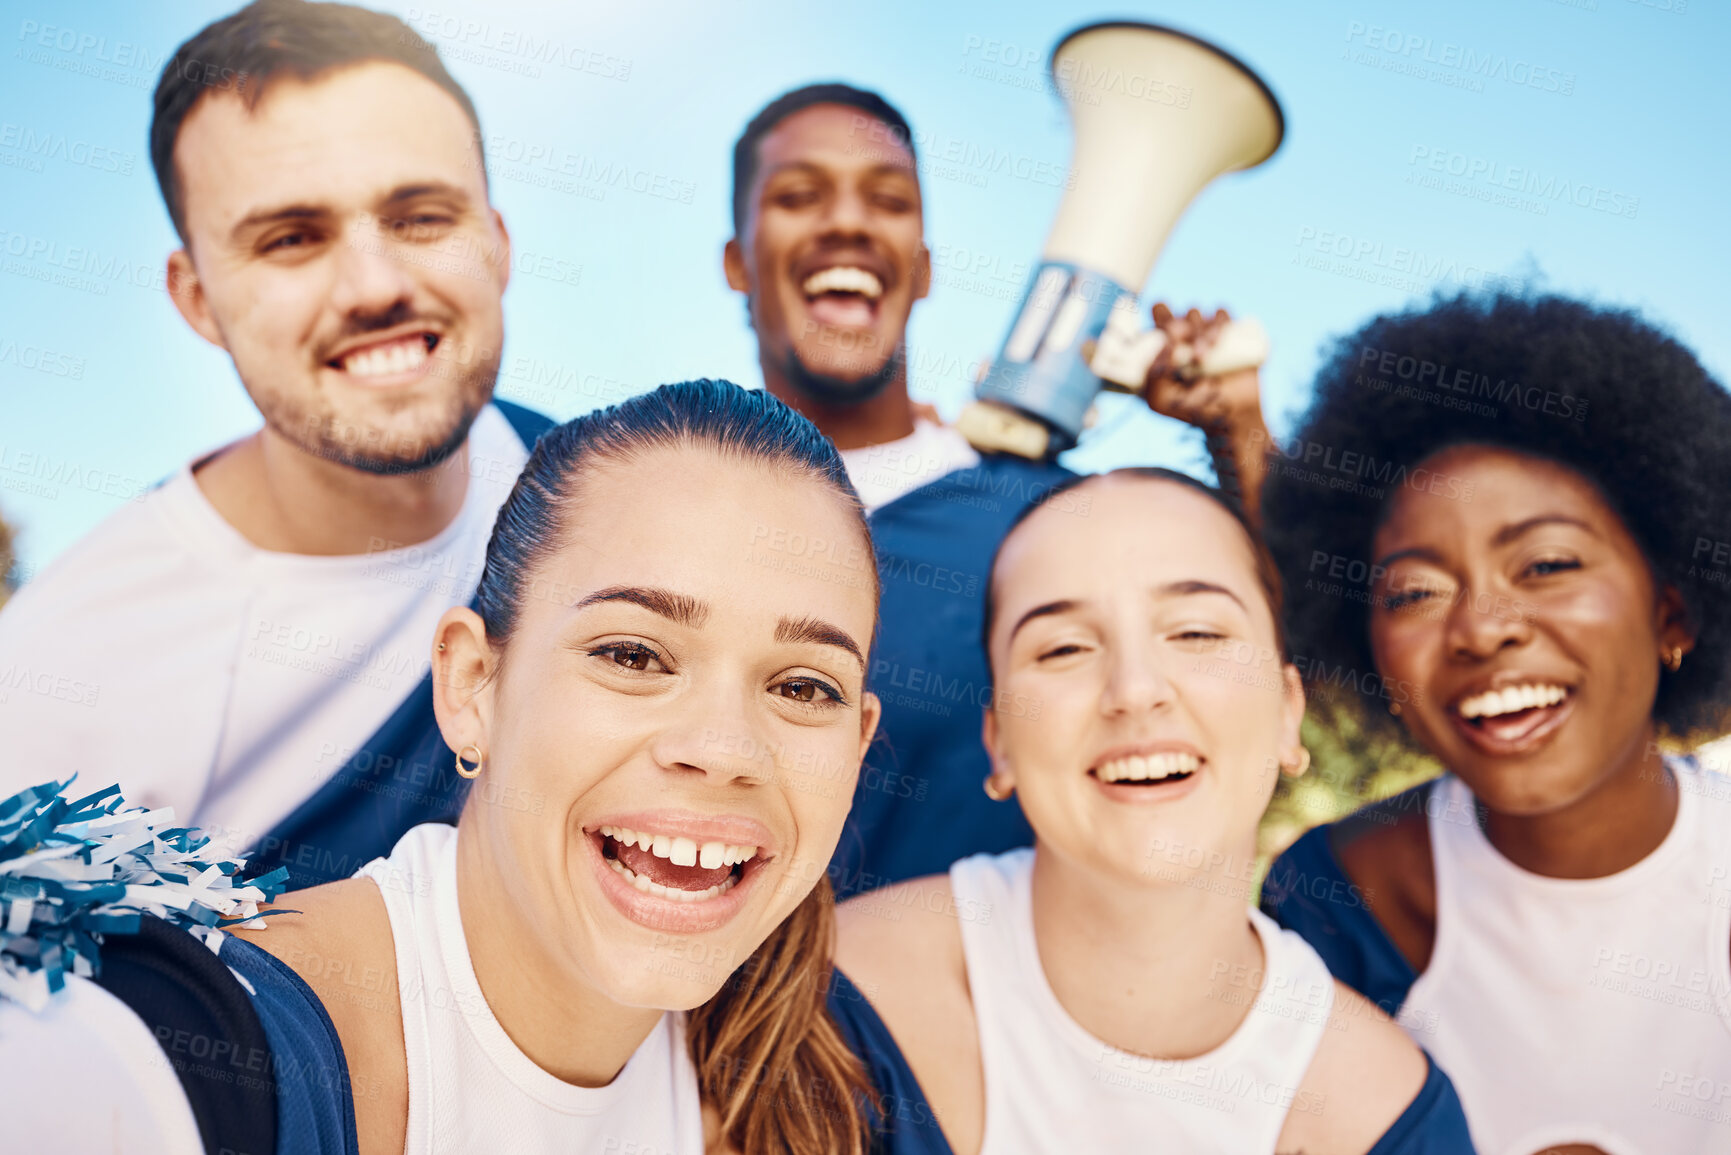 Buy stock photo Cheerleader selfie, sports portrait or happy people cheerleading with support, hope or faith in game. Team spirit, fitness or group of excited cheerleaders with pride, goals or solidarity together 